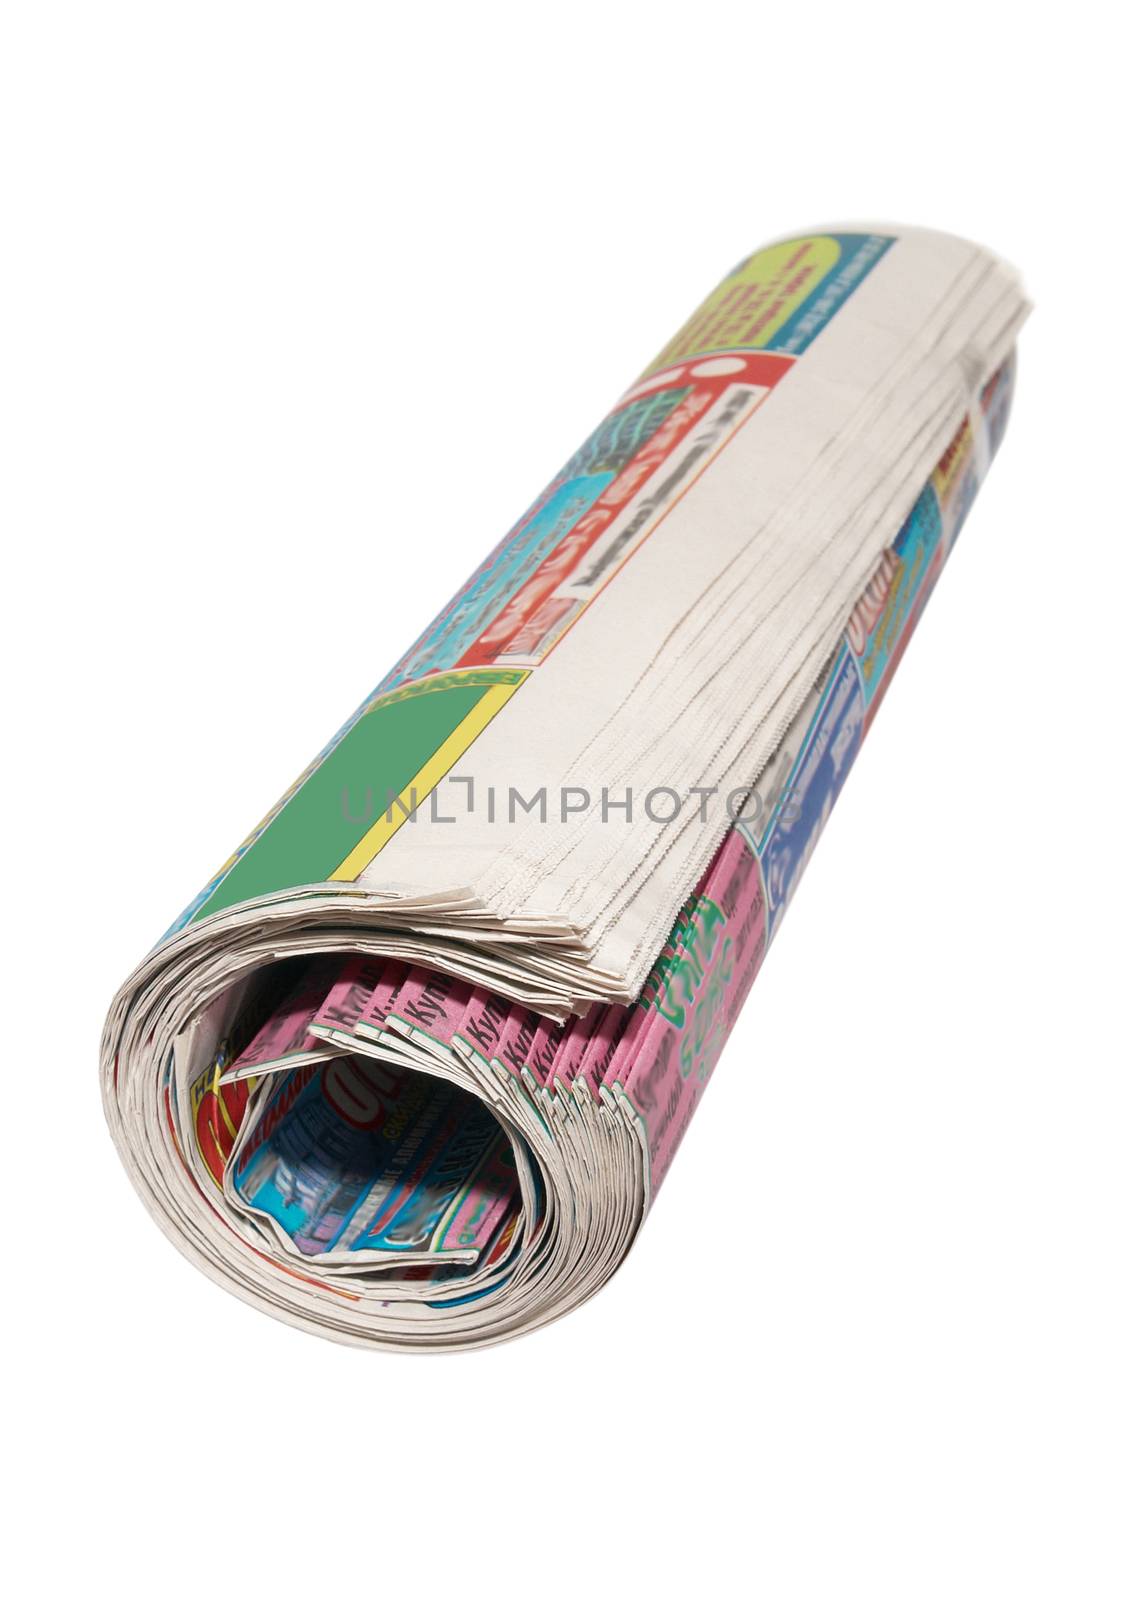 Rolled newspapers isolated on white.